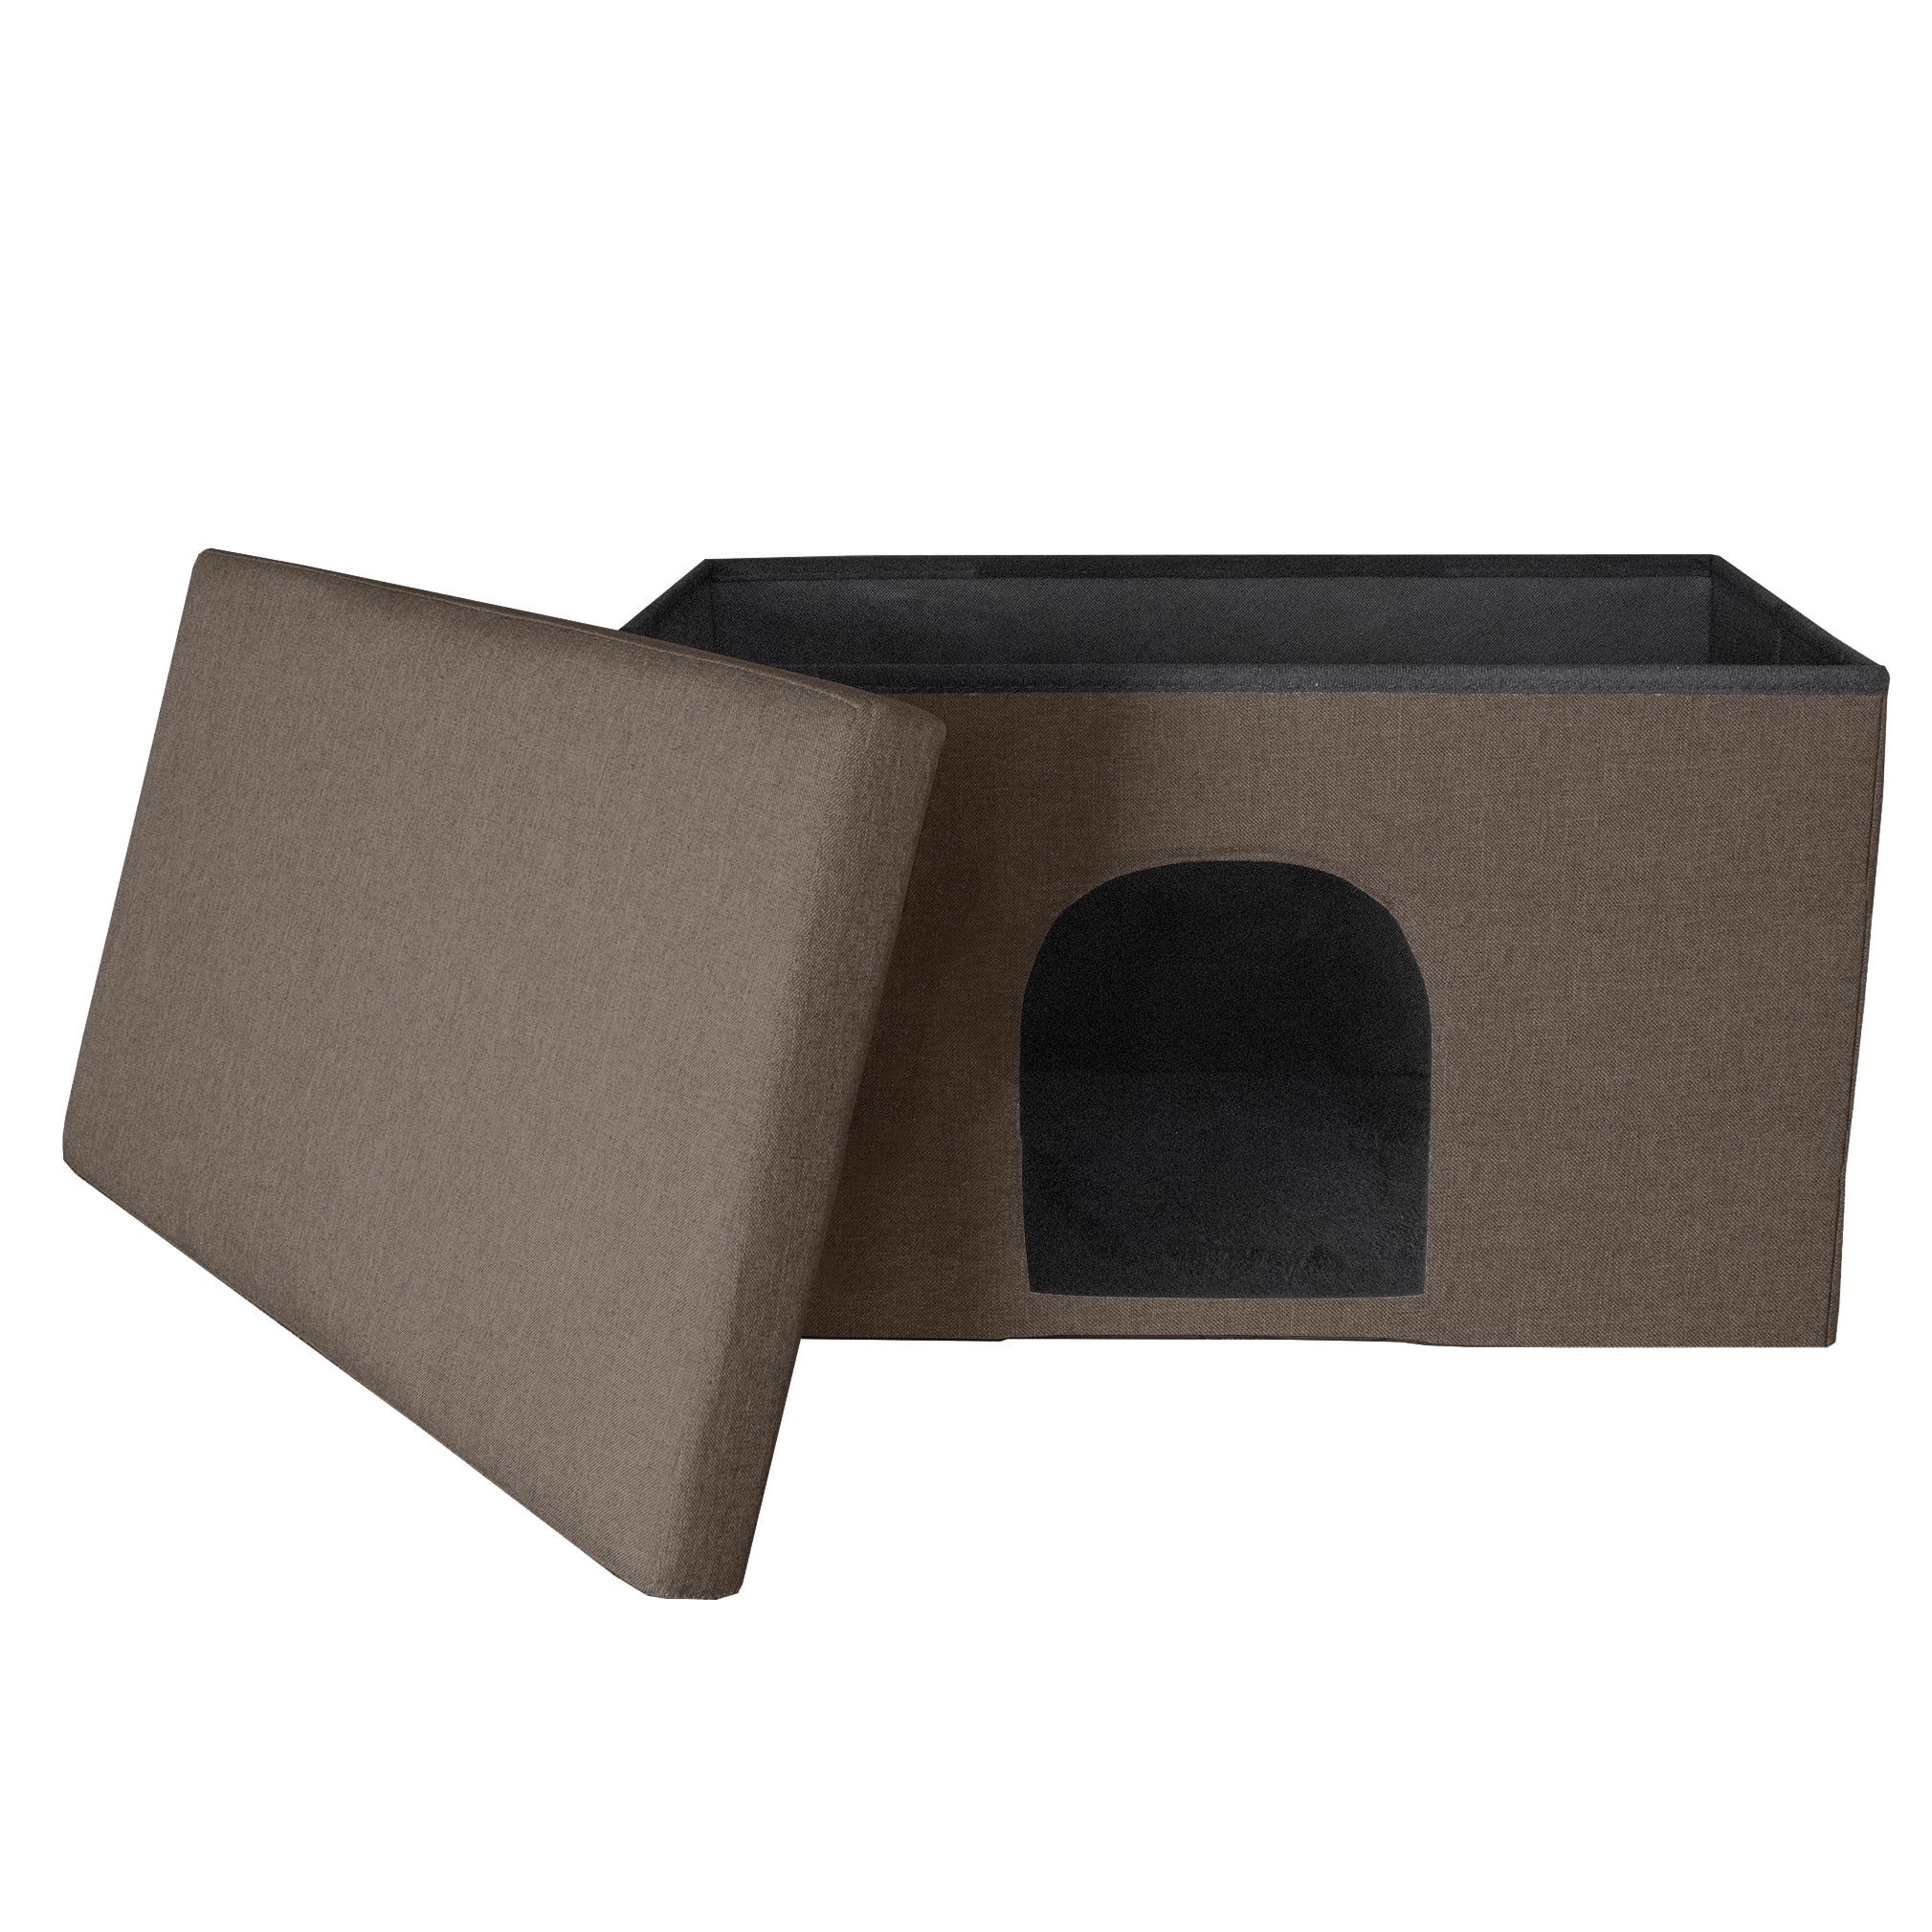 Felt Pet House Private Hideout Den & Collapsible Pop Up Living Room Ottoman Footstool Condo for Cats & Small Dogs Furhaven Pet Dog Bed Available in Multiple Colors & Styles 